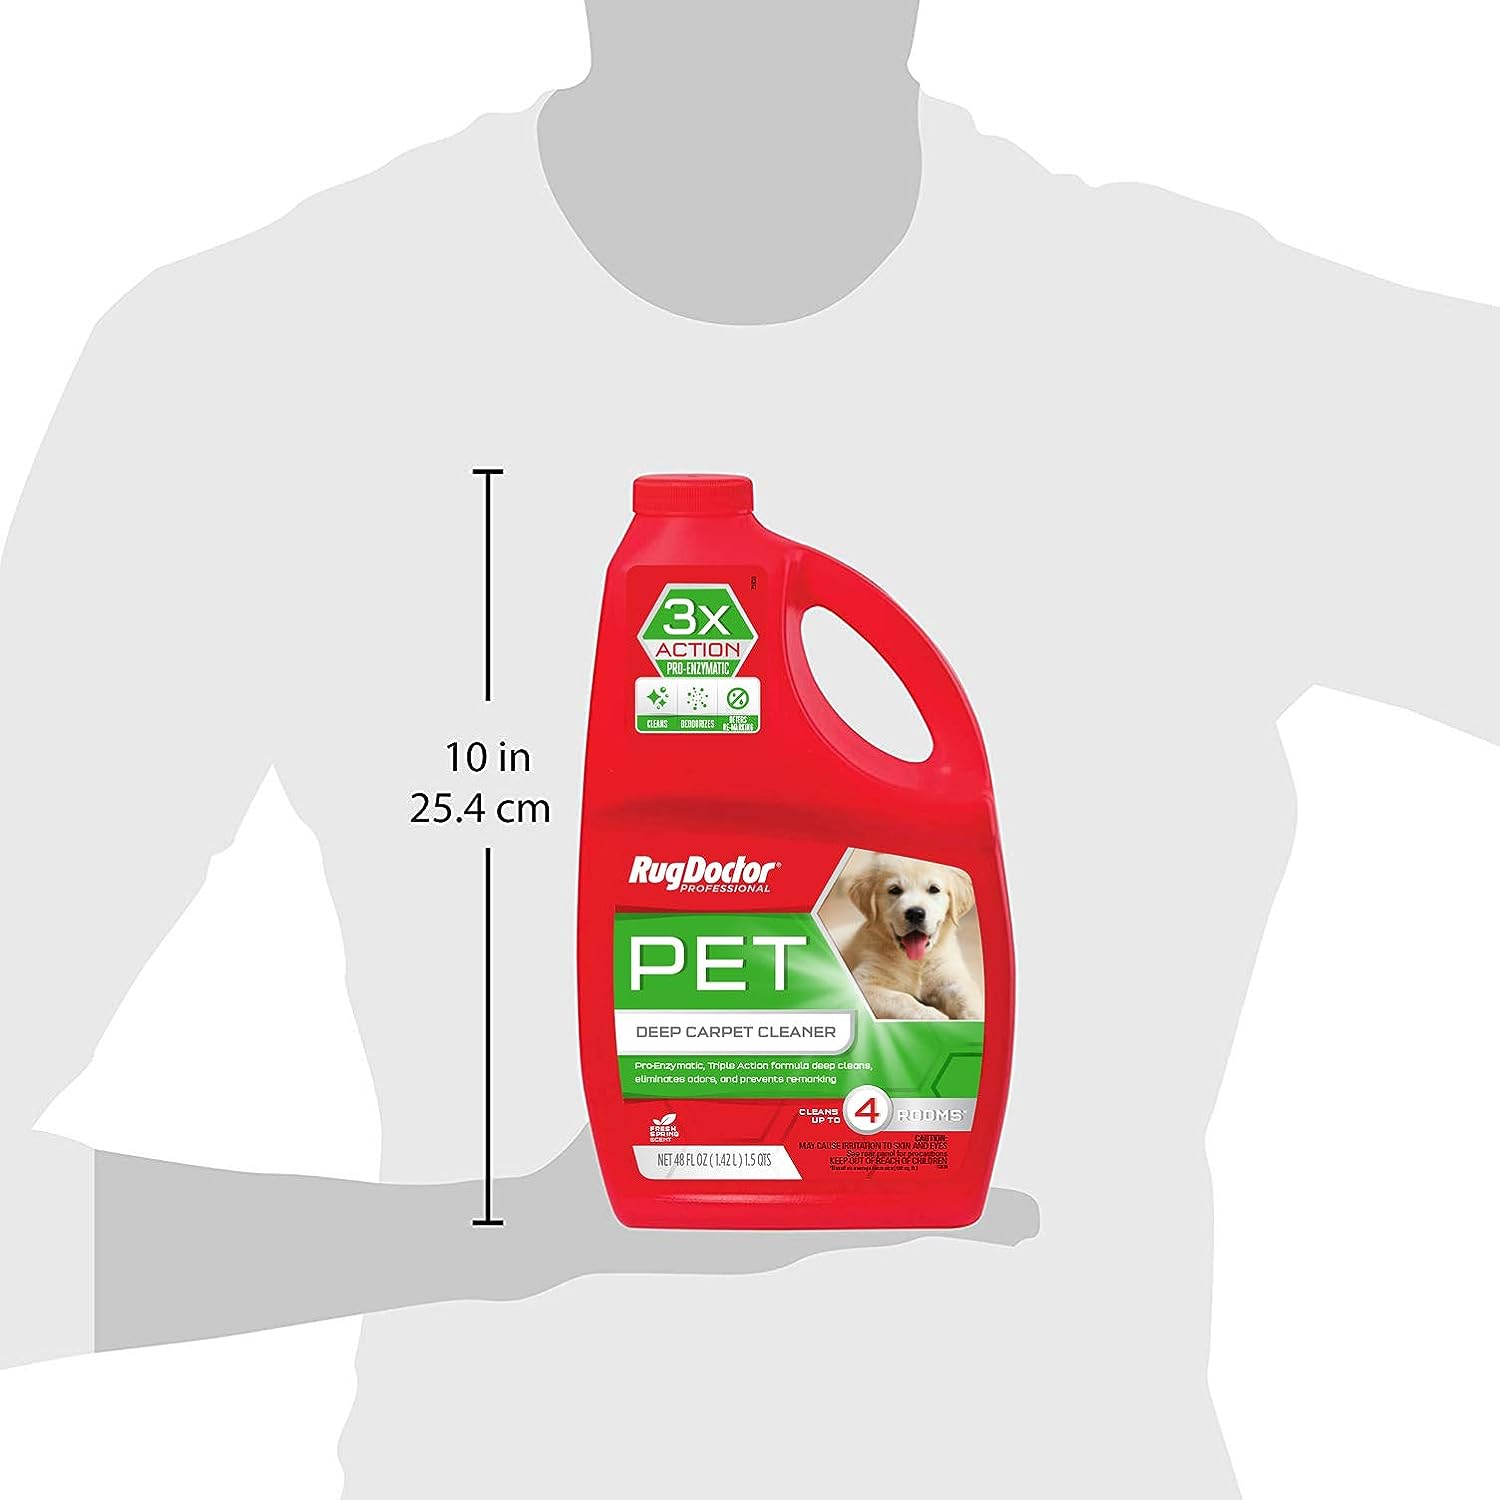 Pet Carpet Cleaner 48 oz size with person